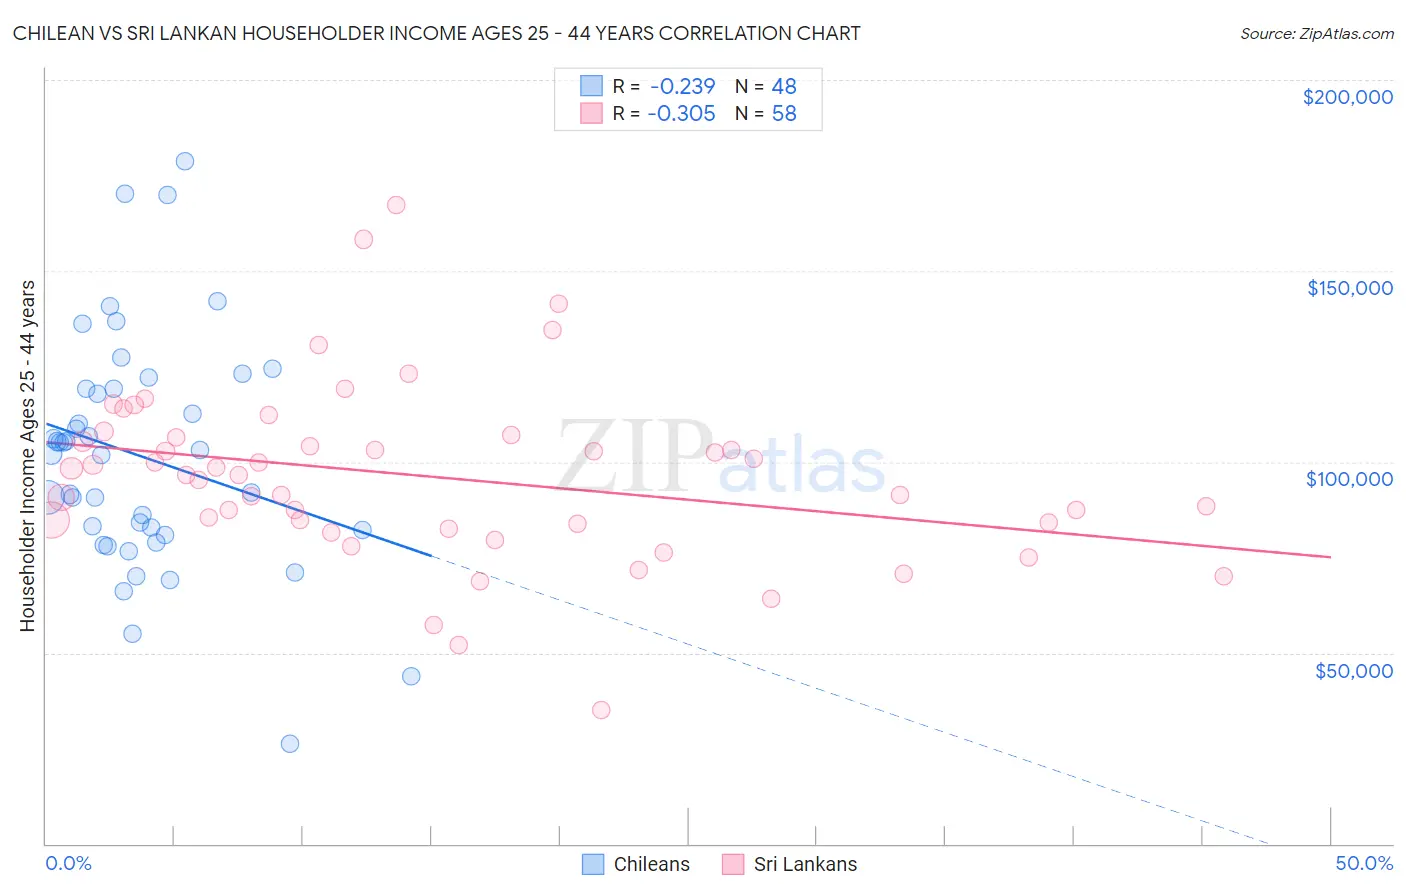 Chilean vs Sri Lankan Householder Income Ages 25 - 44 years